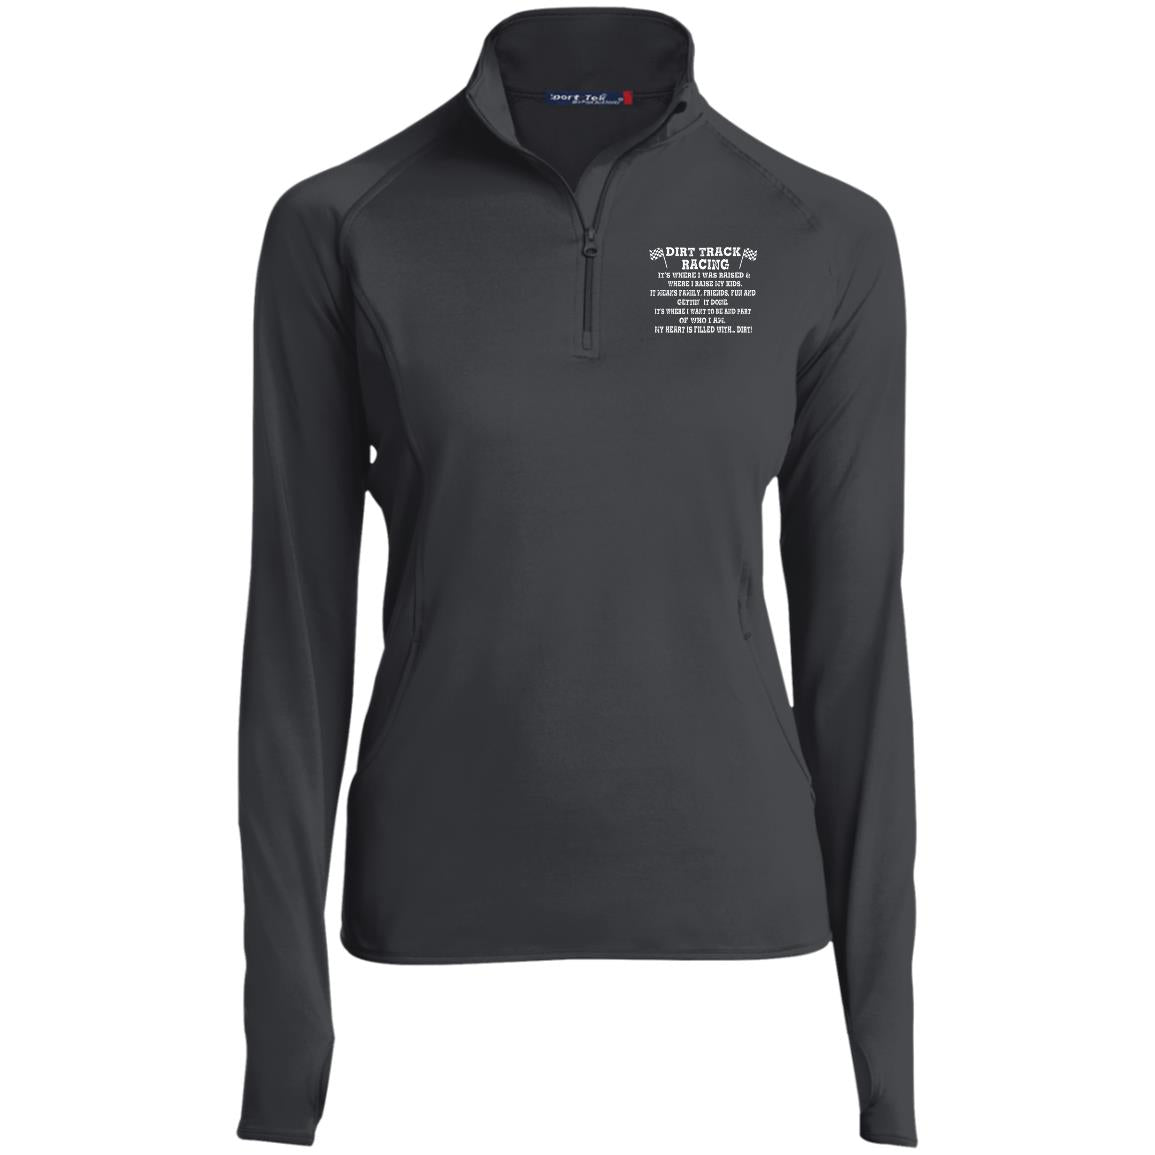 Dirt Track Racing It's Where I Was Raised Ladies' 1/2 Zip Performance Pullover